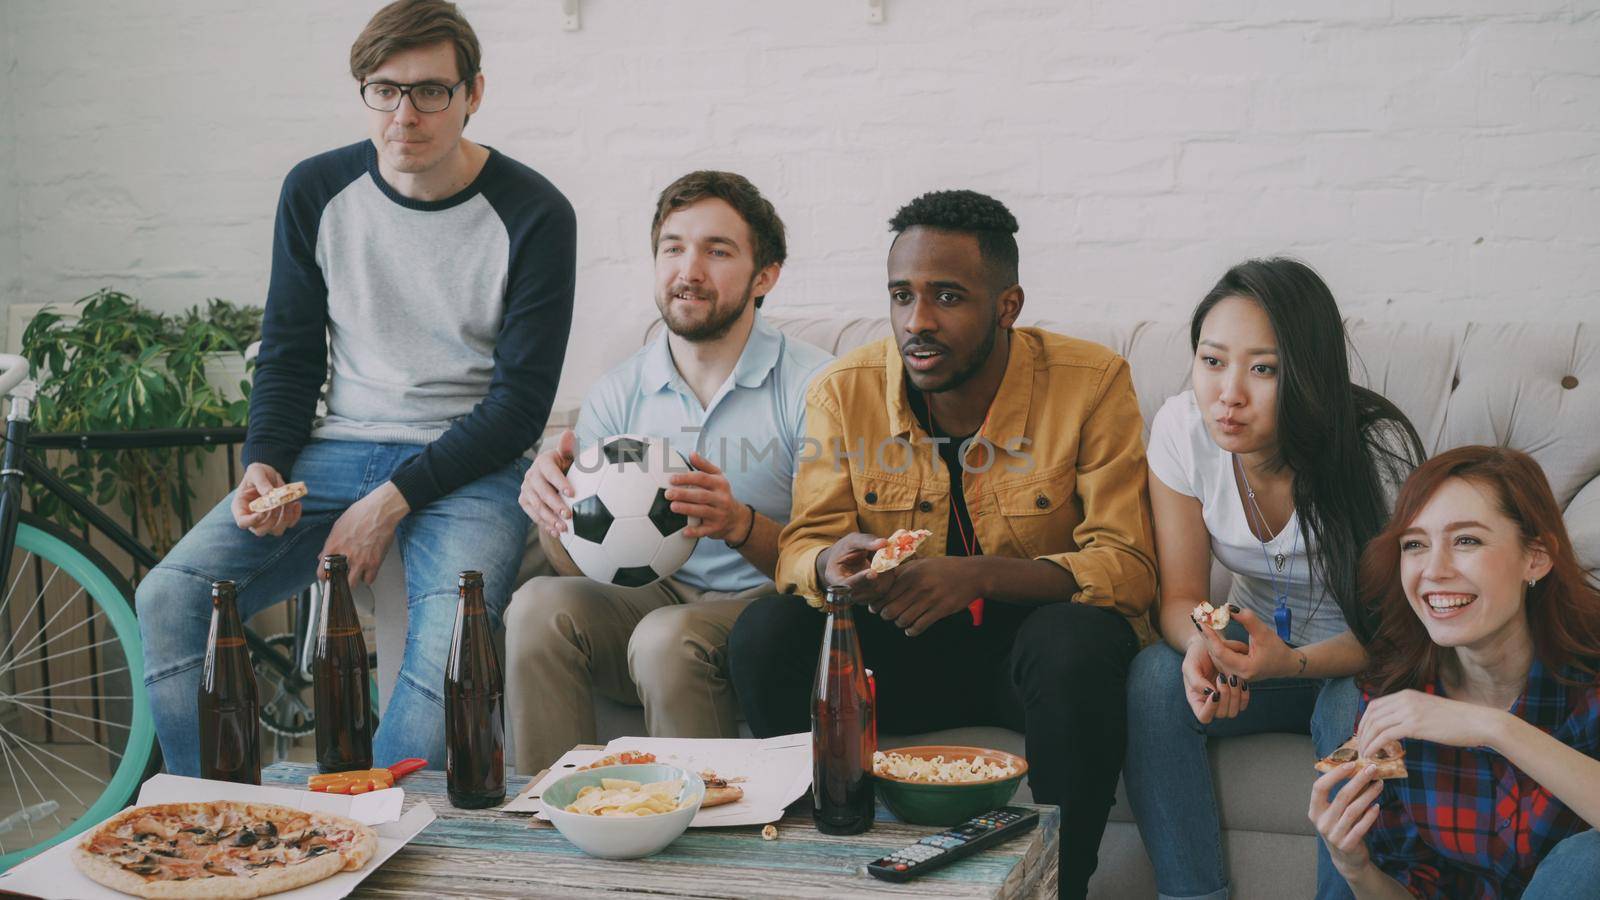 Multi ethnic group of friends sports fans watching football championship on TV together eating pizza and drinking beer at home indoors